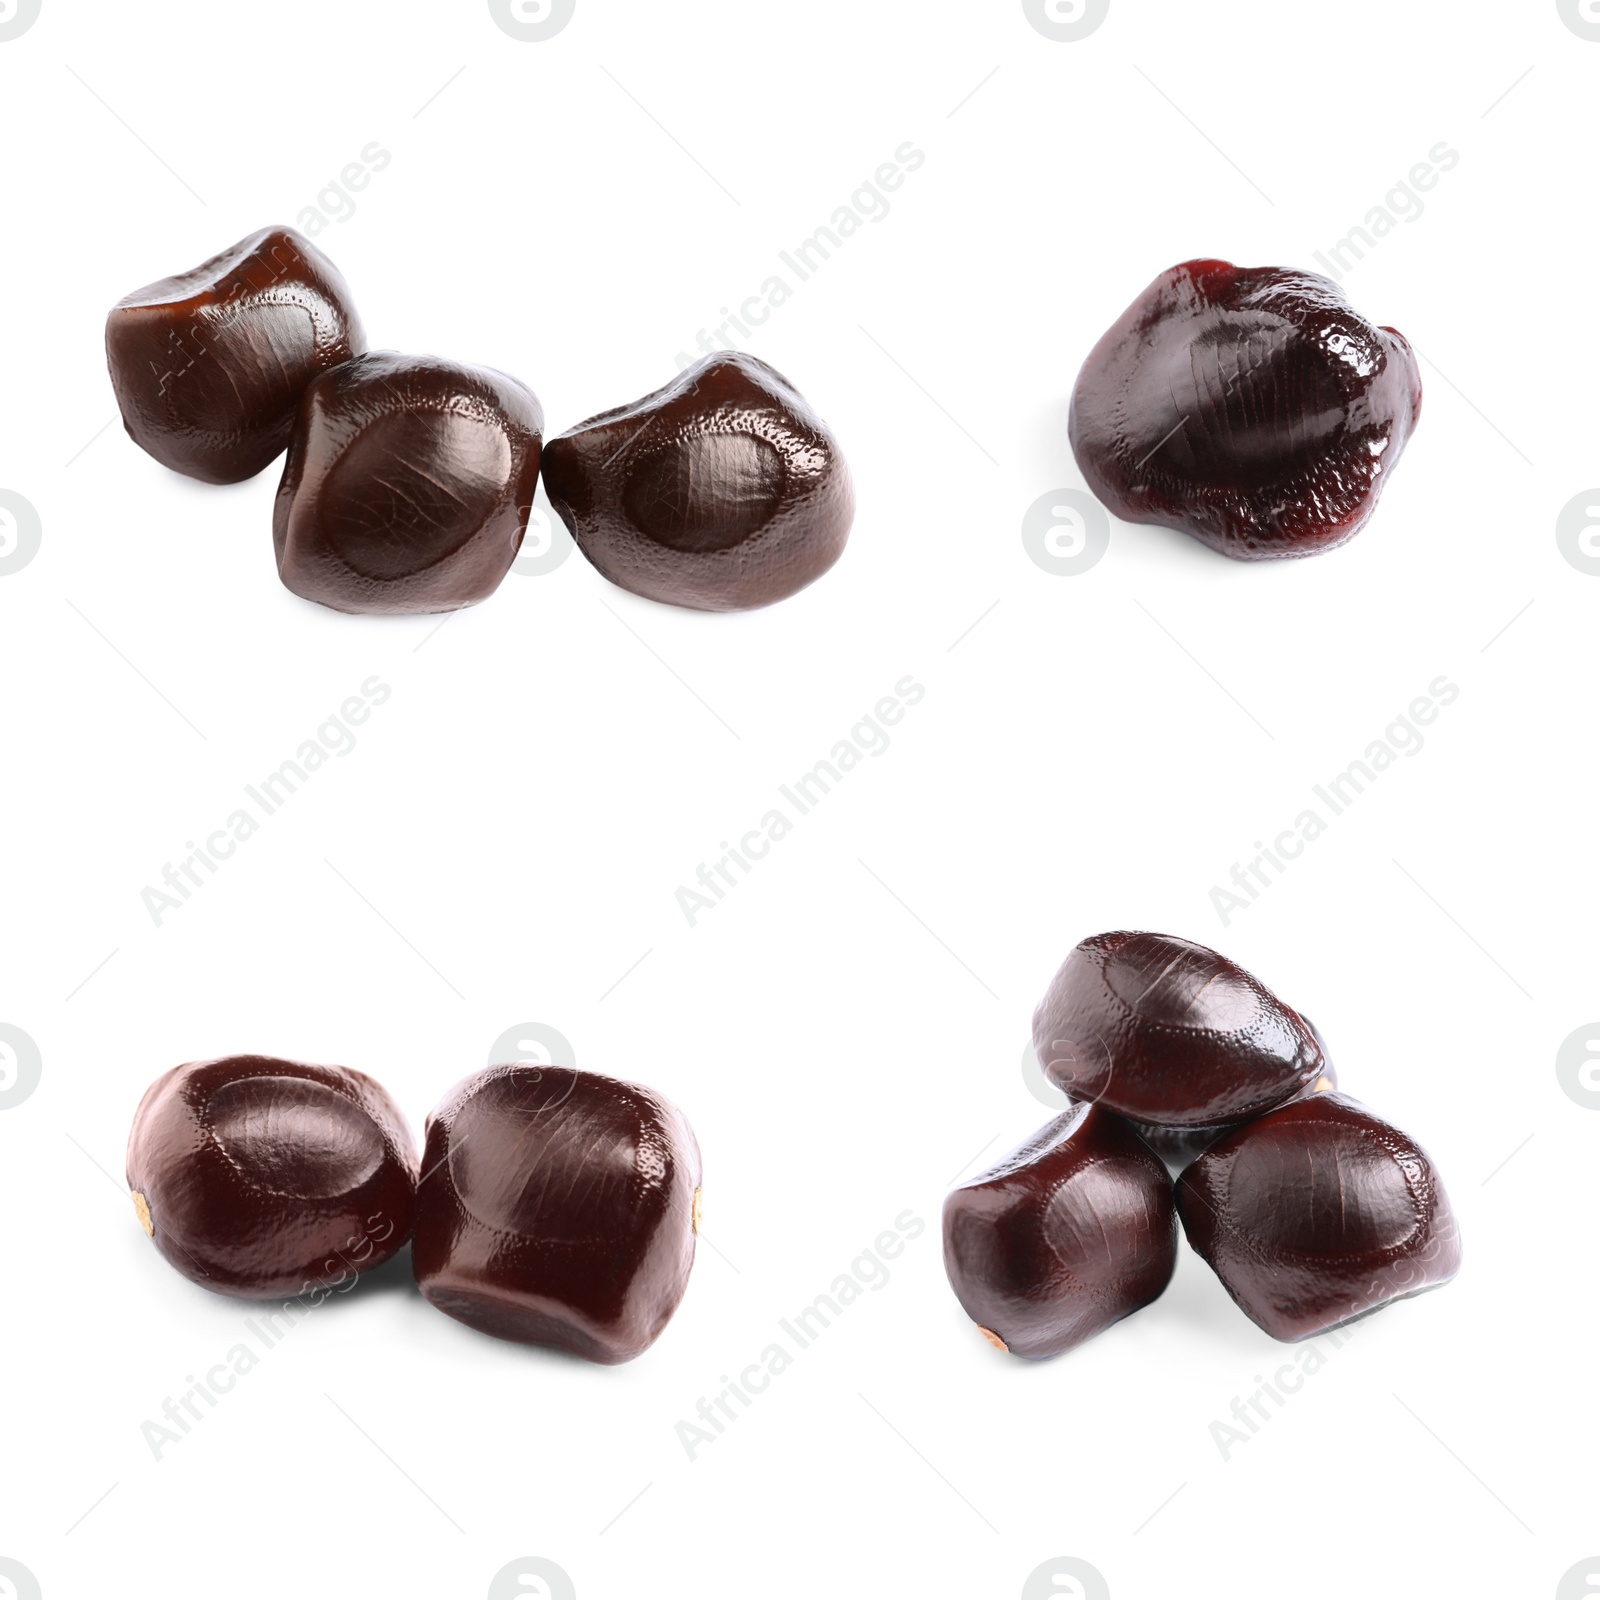 Image of Set with brown tamarind seeds on white background